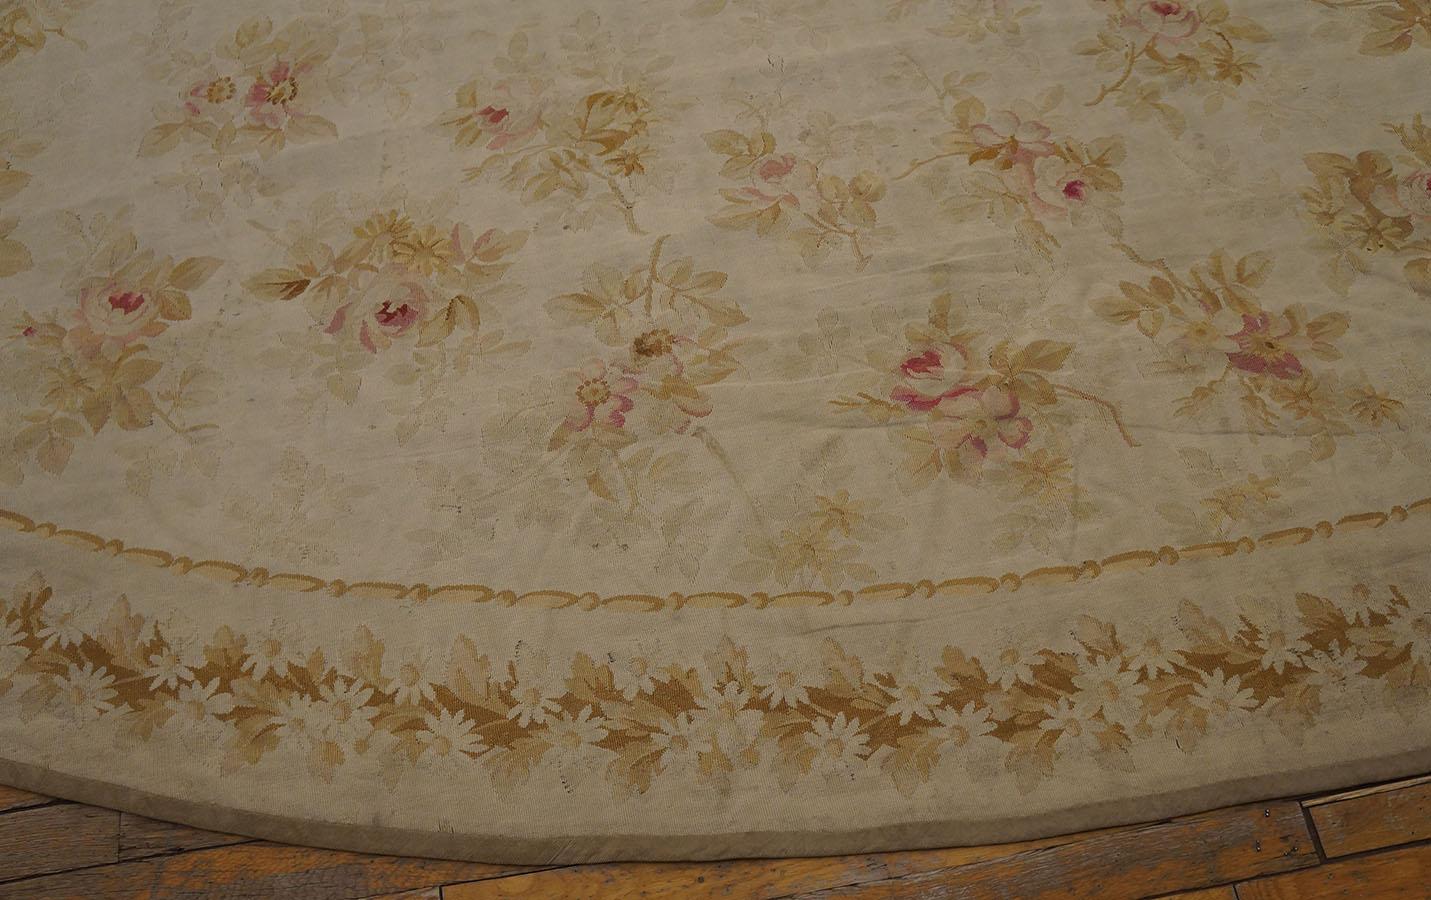 Late 19th Century French Aubusson Carpet ( 8' 4'' x 13' 4'' - 255 x 405 cm )  For Sale 3